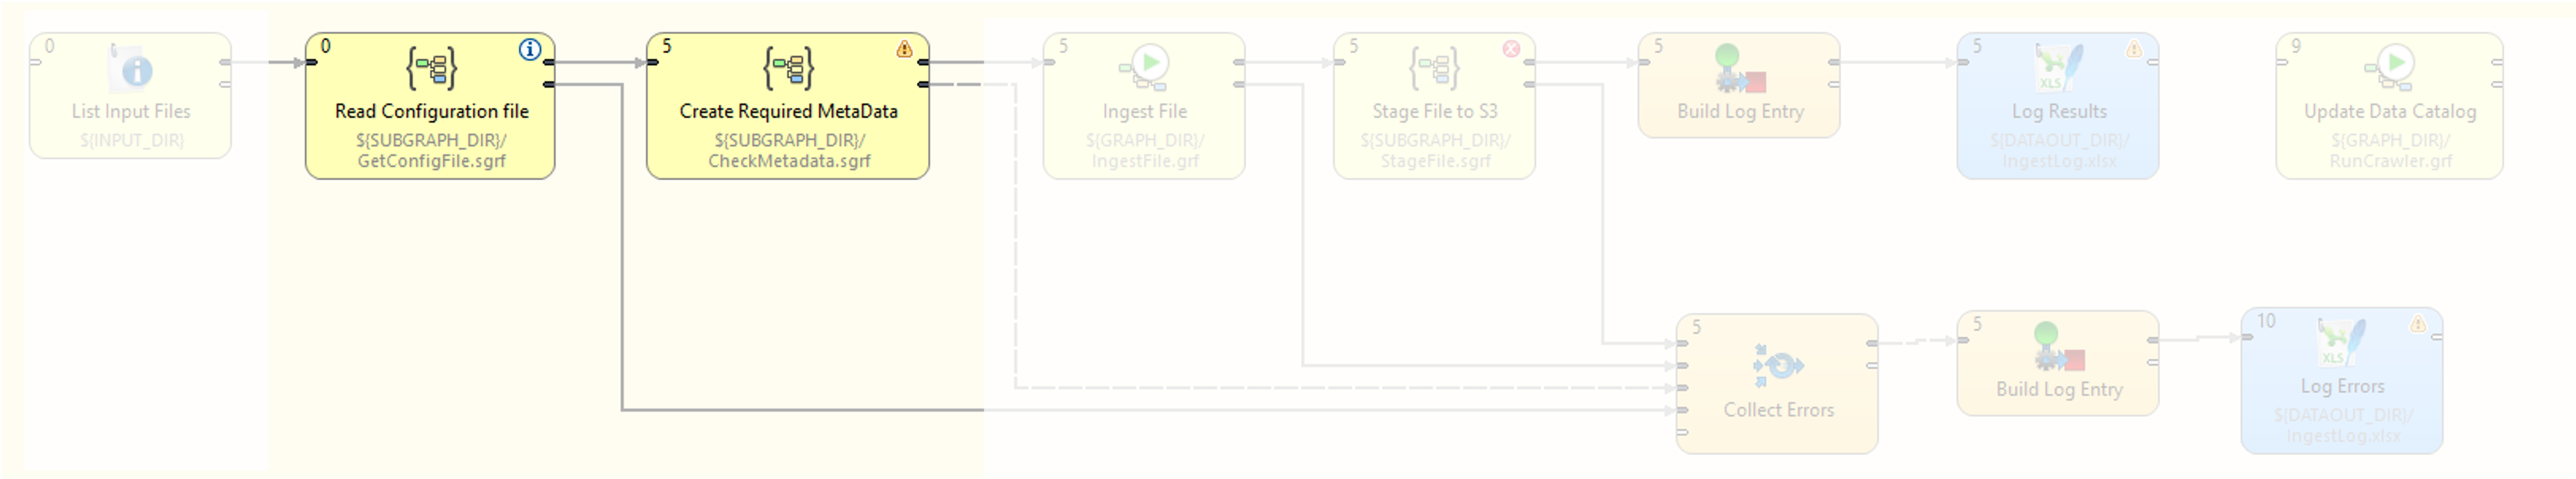 Using a configuration file to drive the data onboarding pipeline